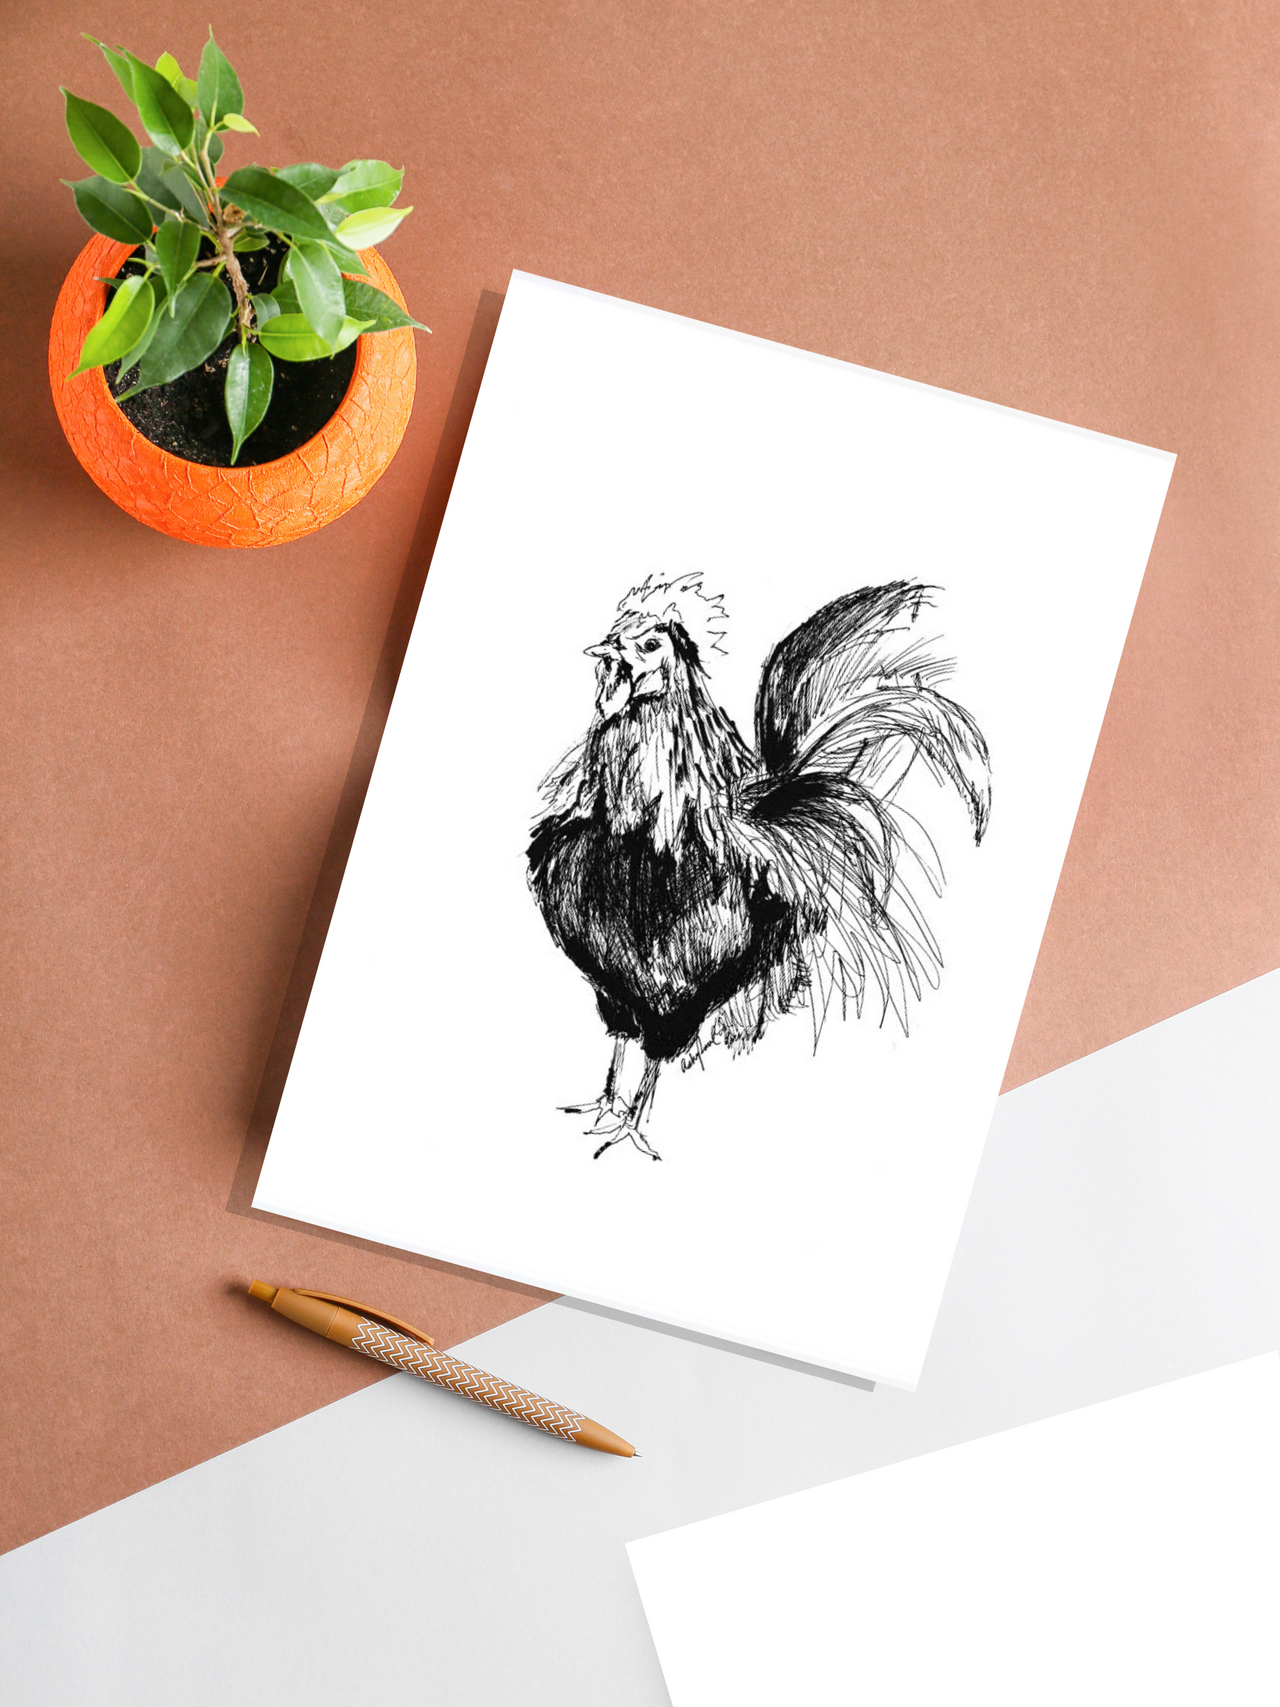 rooster art print hanging on table